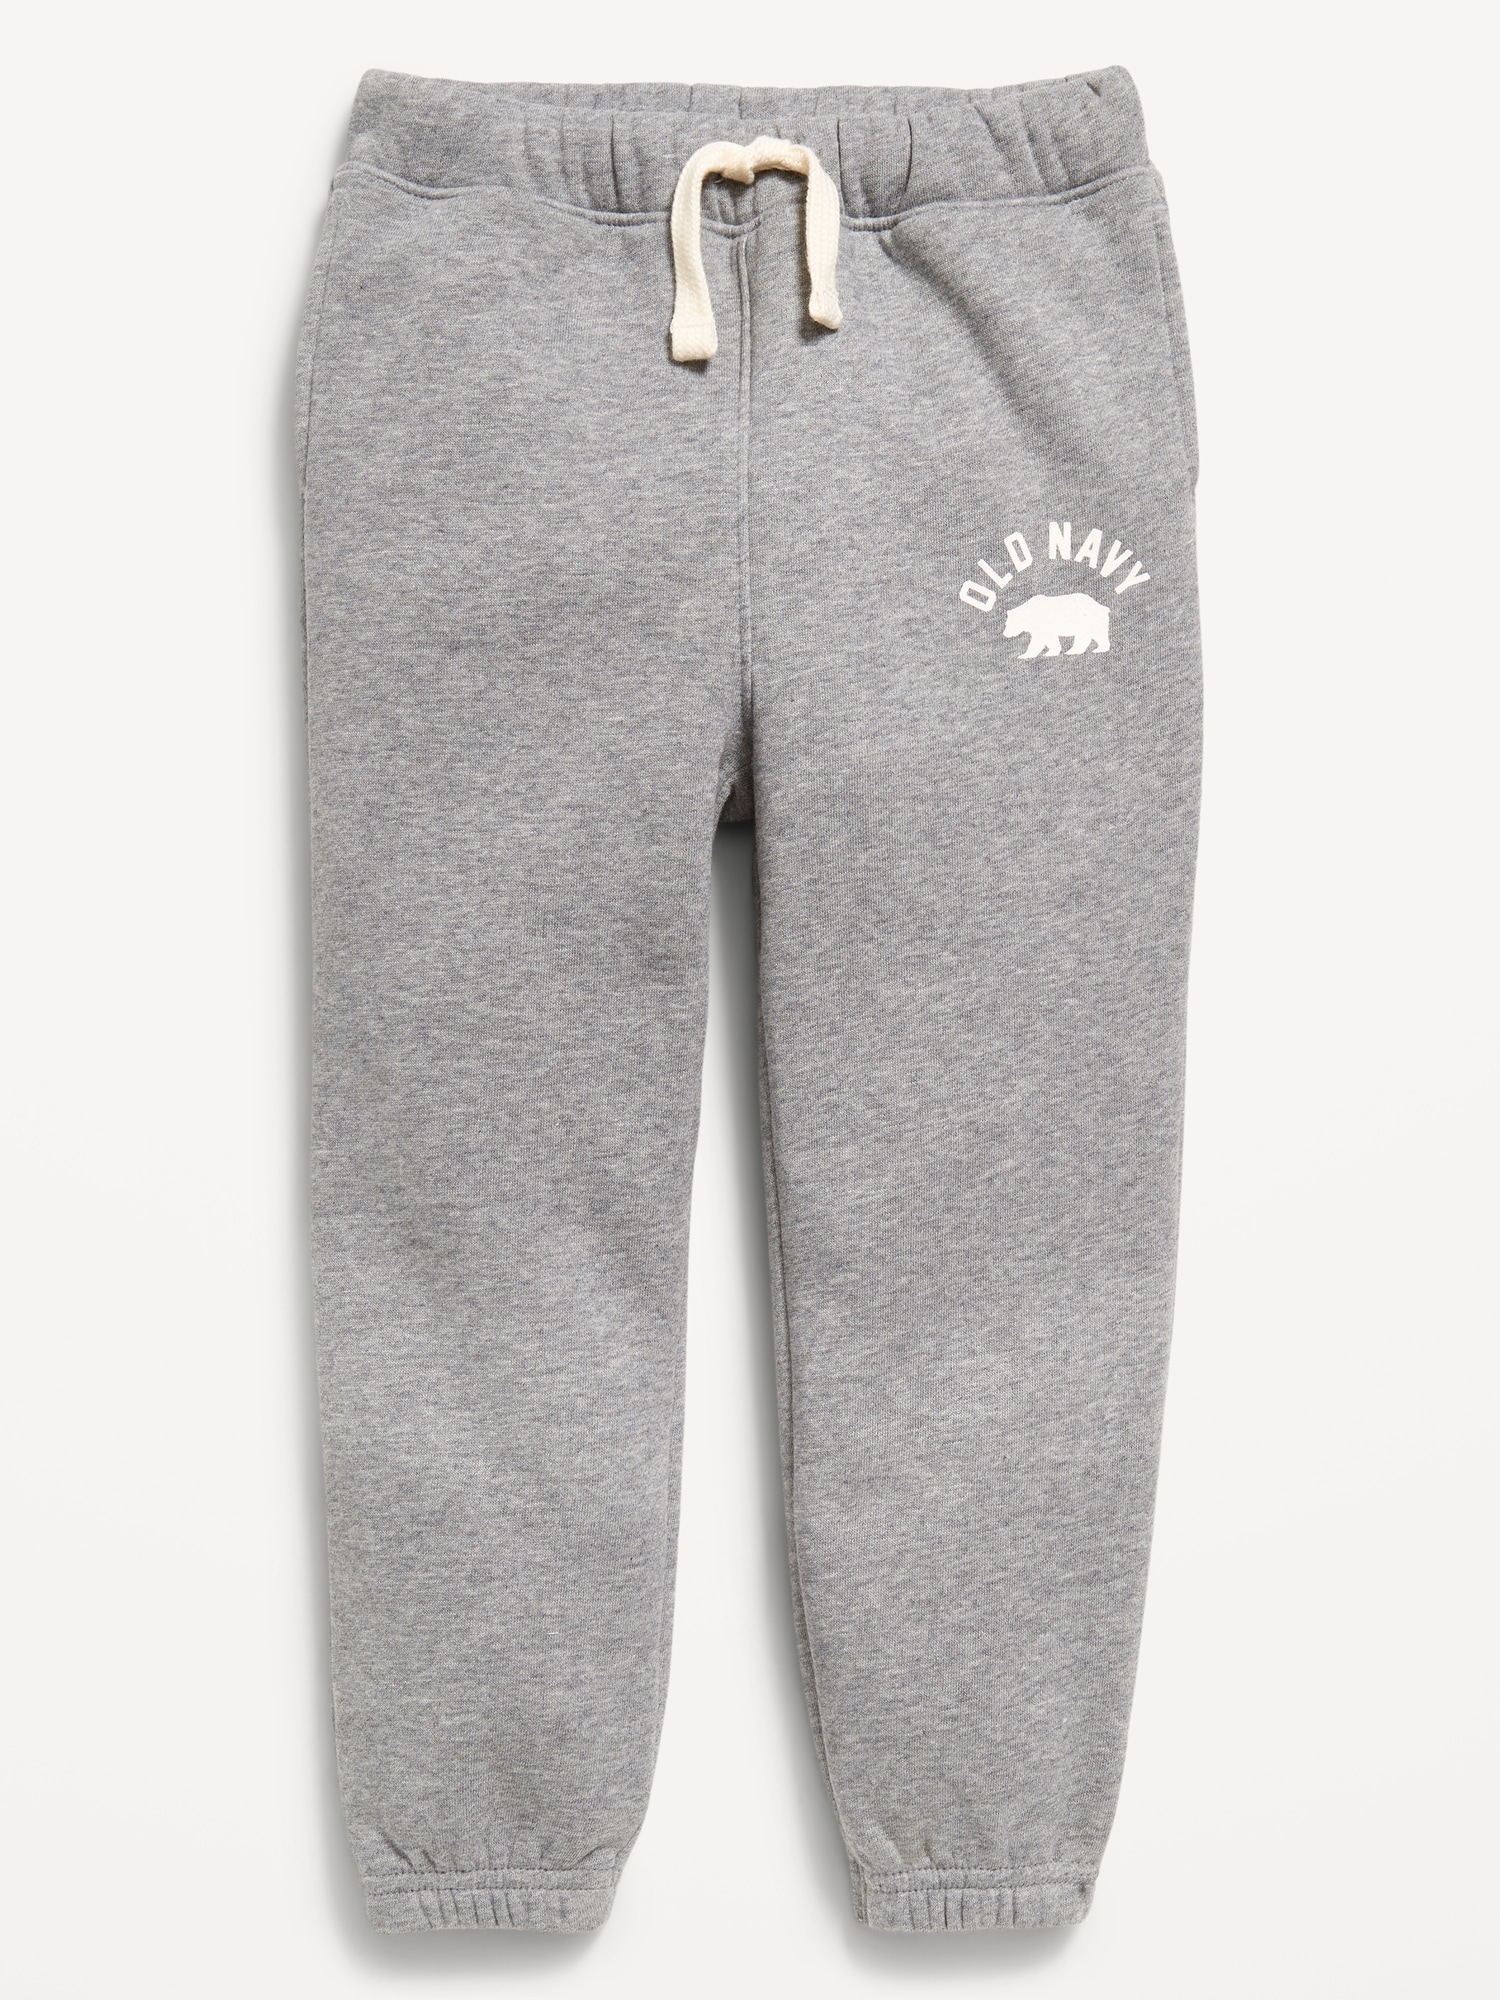 Unisex Logo-Graphic Jogger Sweatpants for Toddler